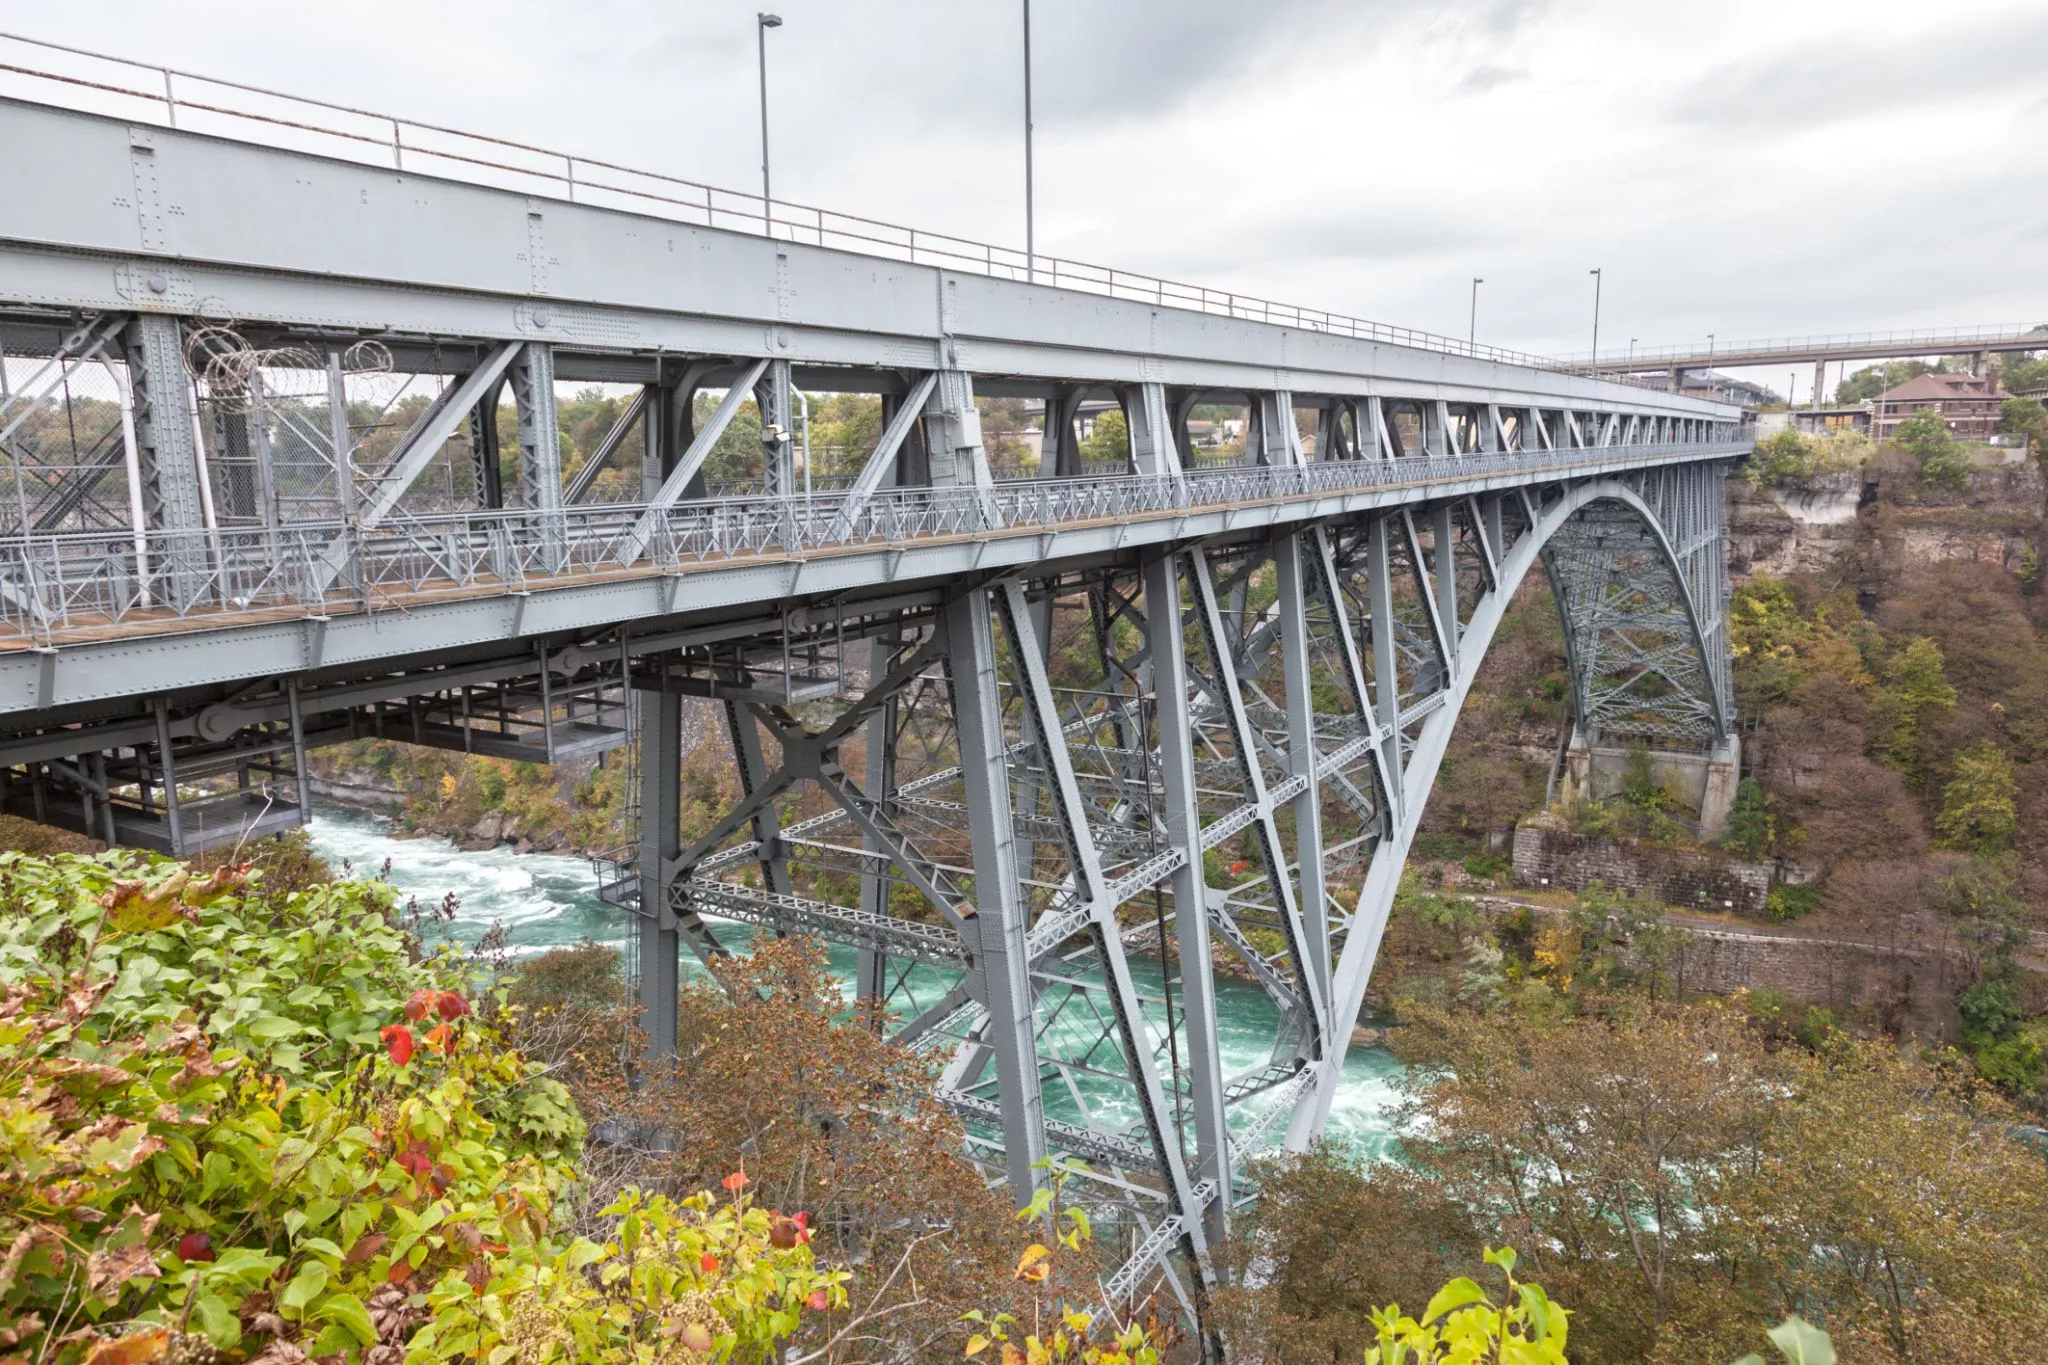 The Whirlpool Rapids Bridge in USA, North America | Architecture - Rated 3.7